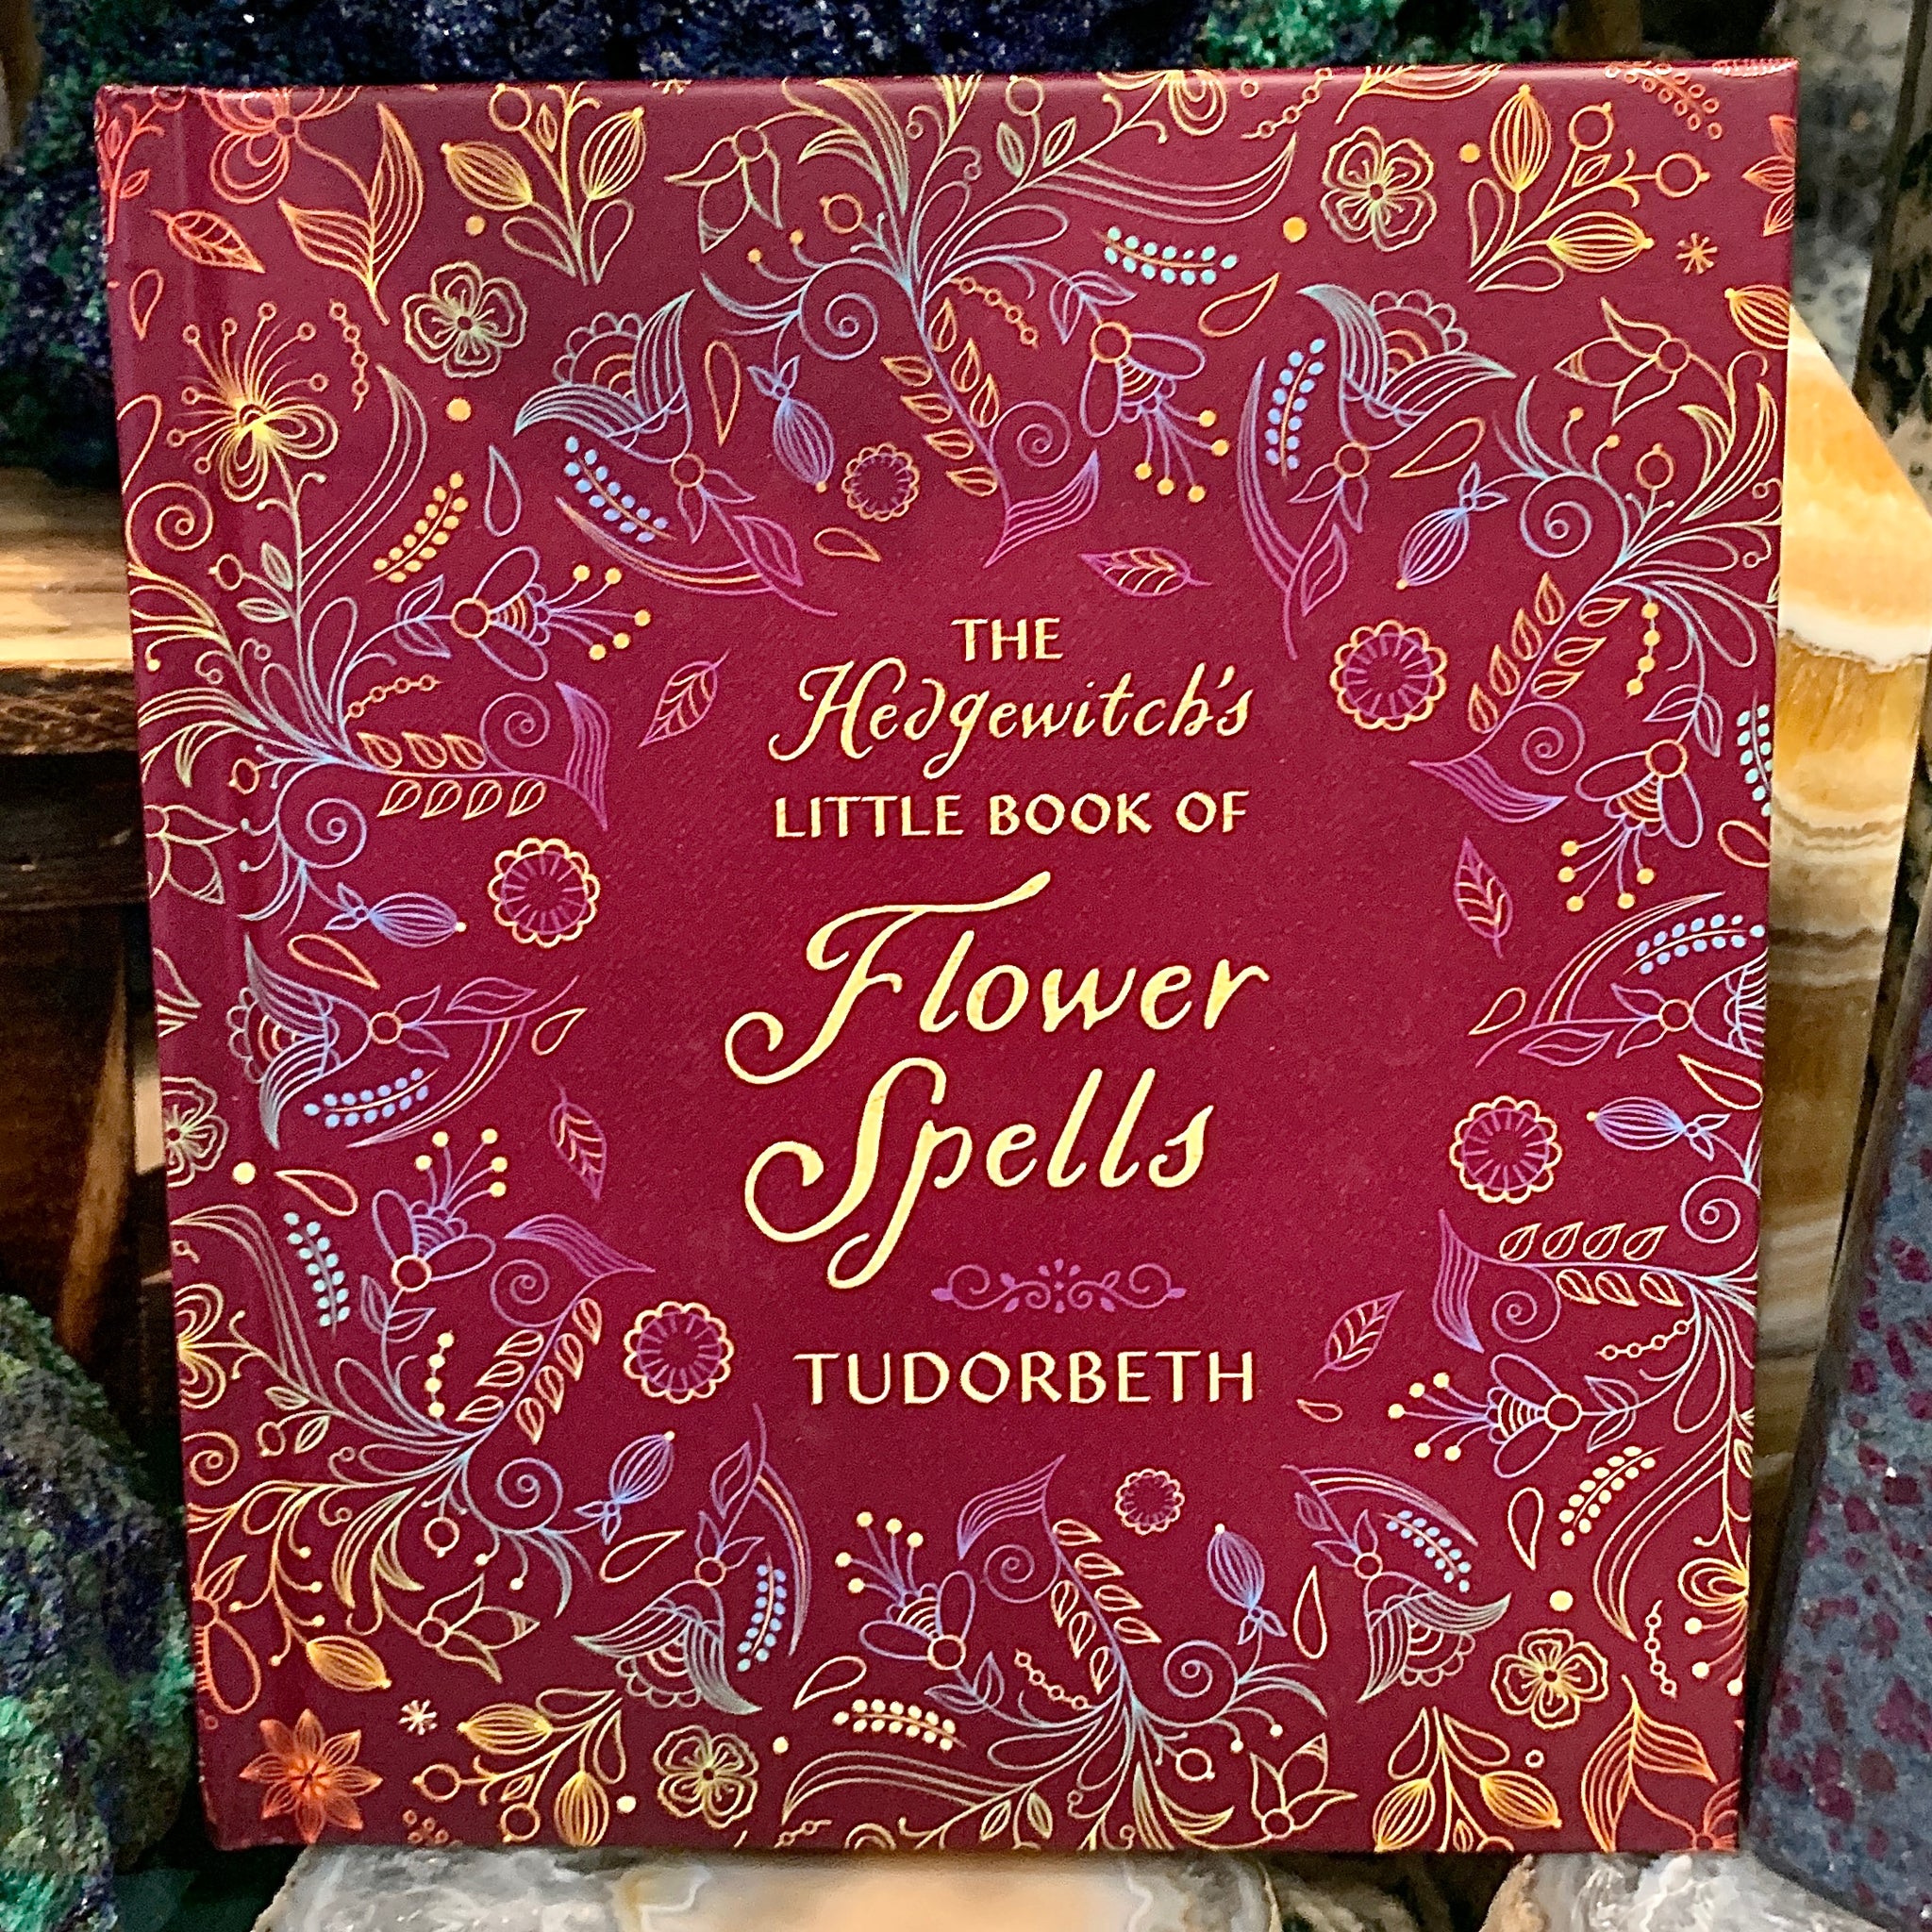 The Hedgewitch’s Little Book of Flower Spells by Tudorbeth